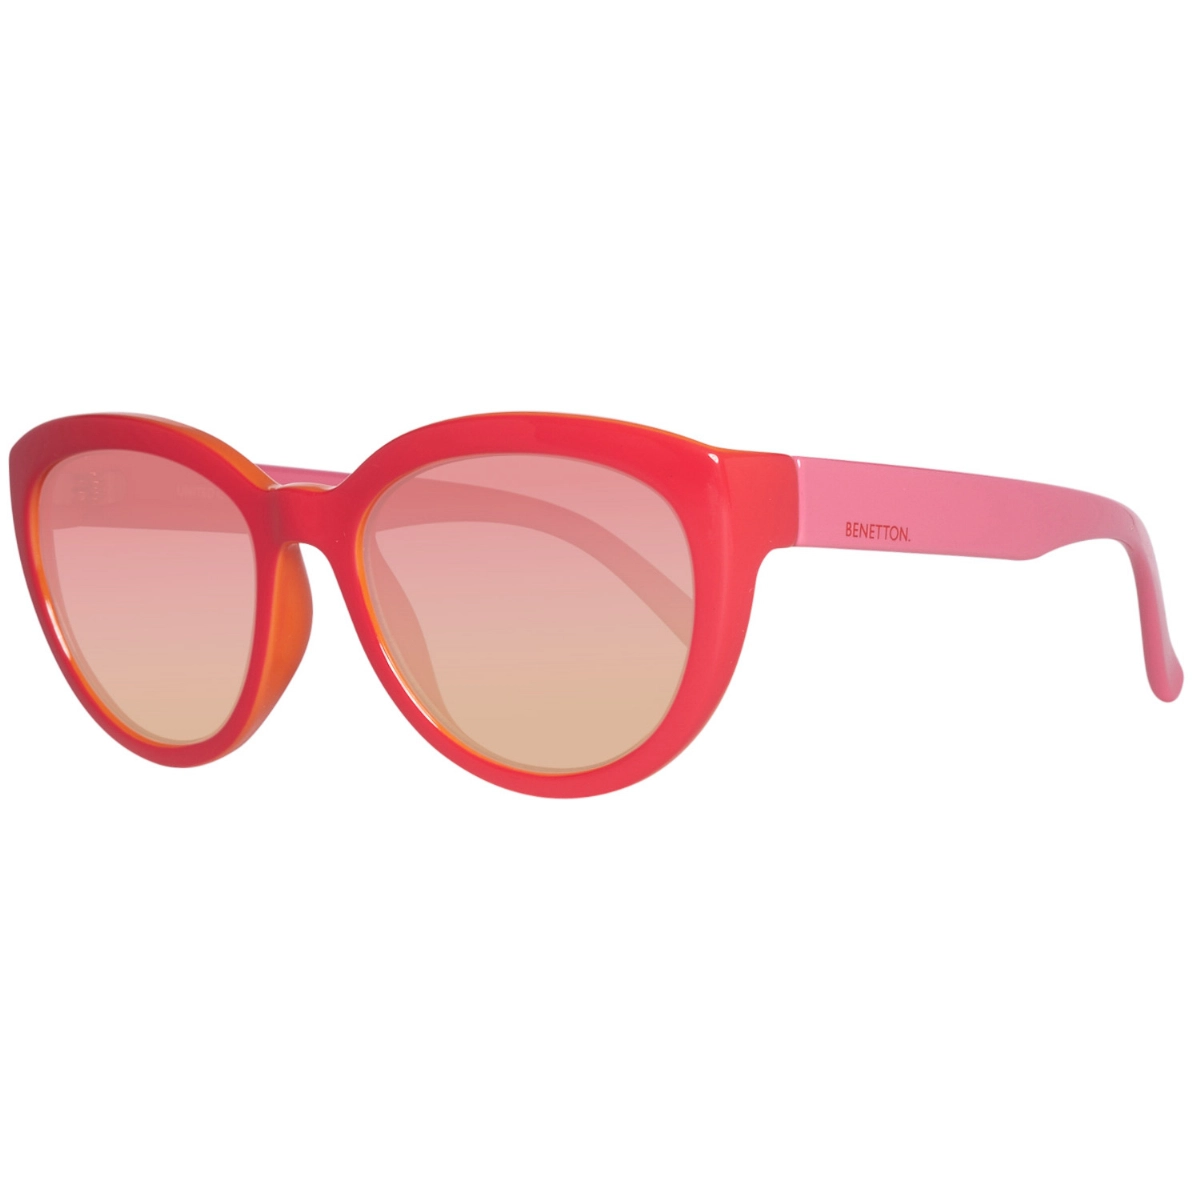 GLASSES FOR WOMAN, BENETTON BE920S02